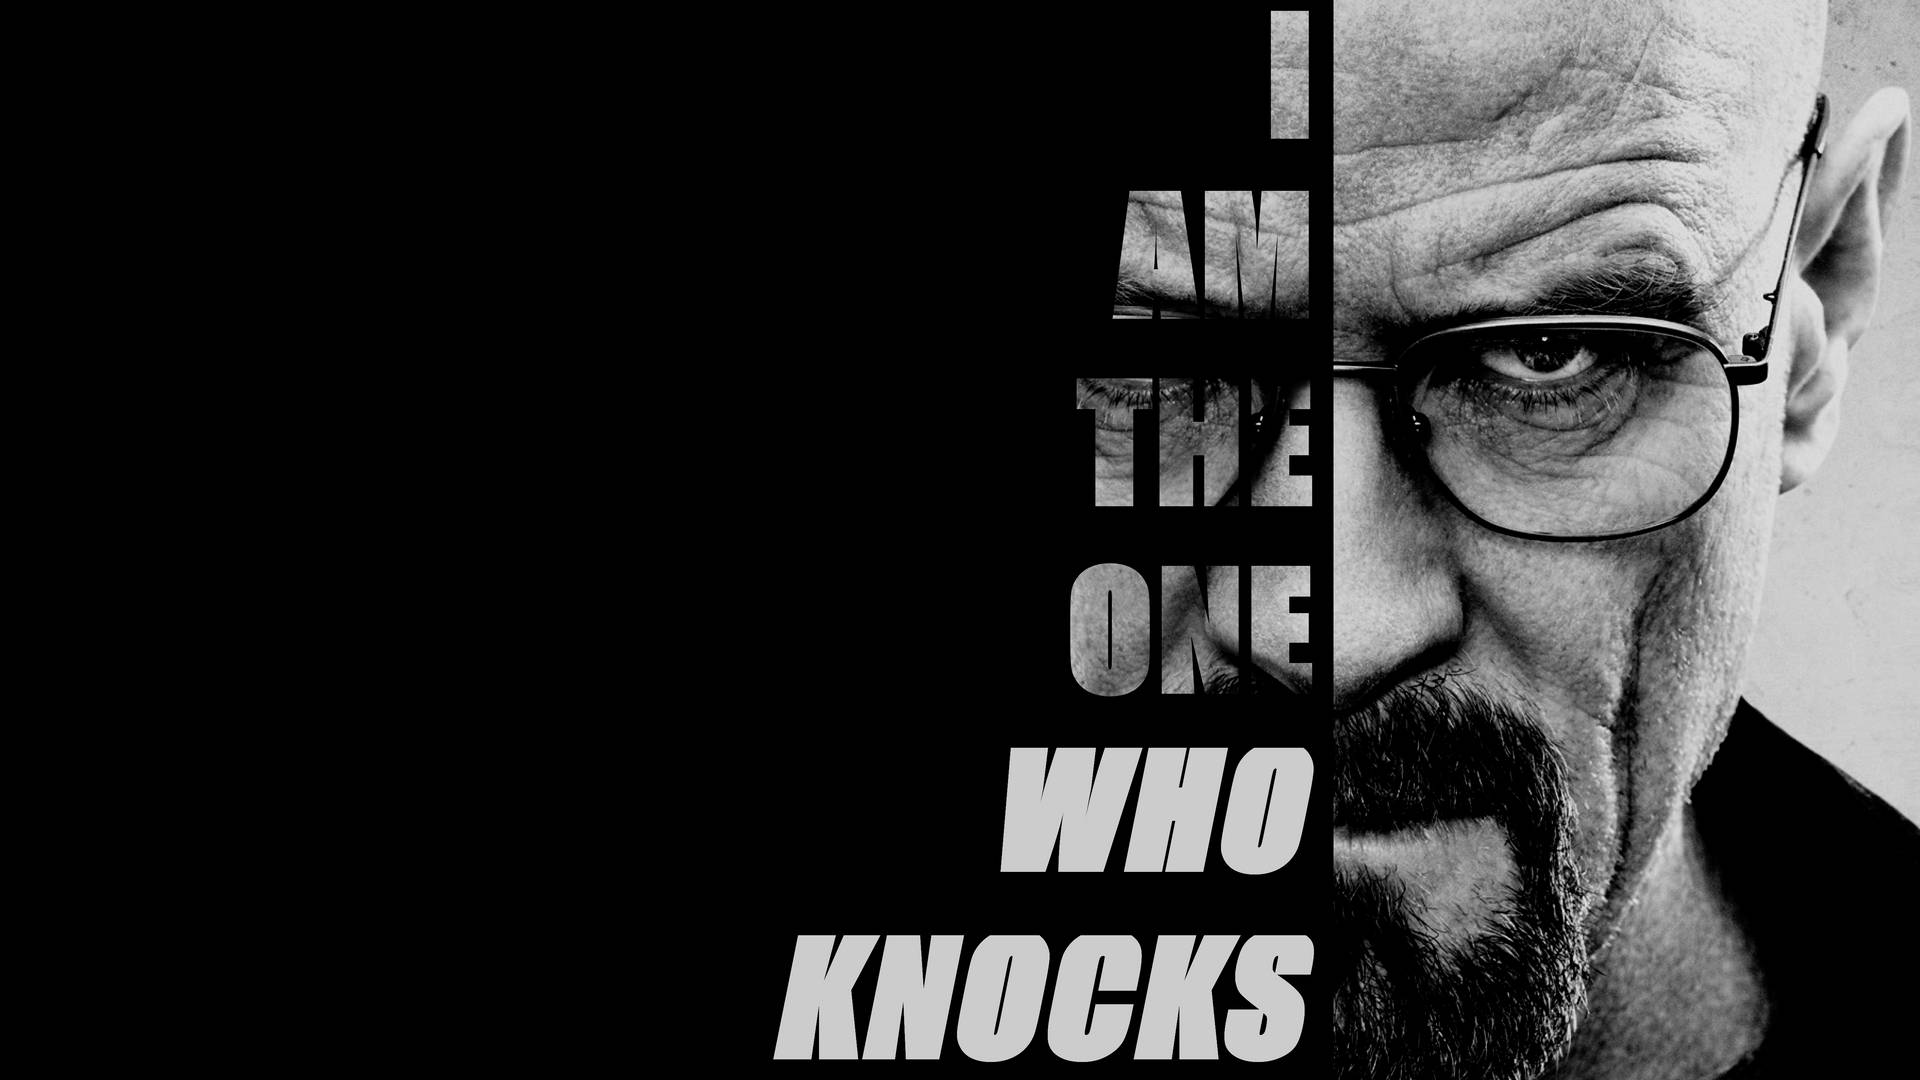 "There comes a time when you got to make a stand, or die with regret" - Walter White Wallpaper